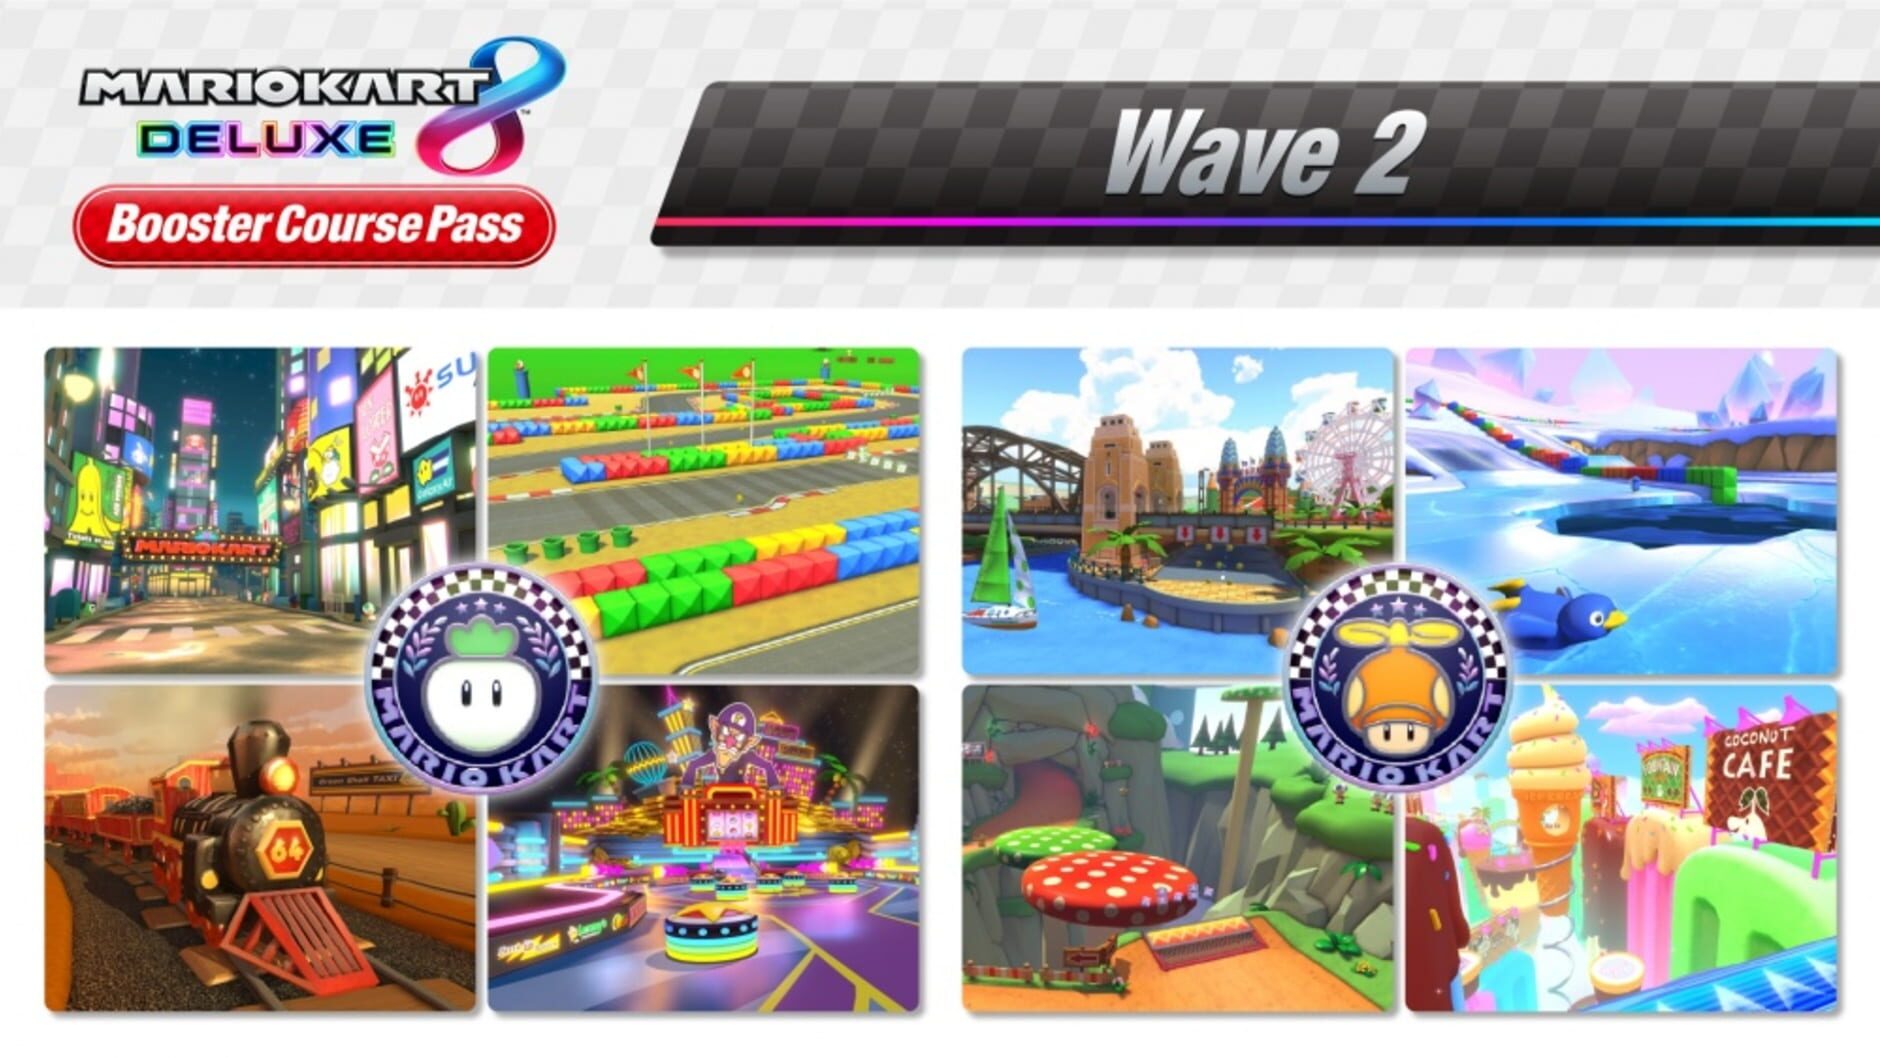 Screenshot for Mario Kart 8 Deluxe: Booster Course Pass - Wave 2